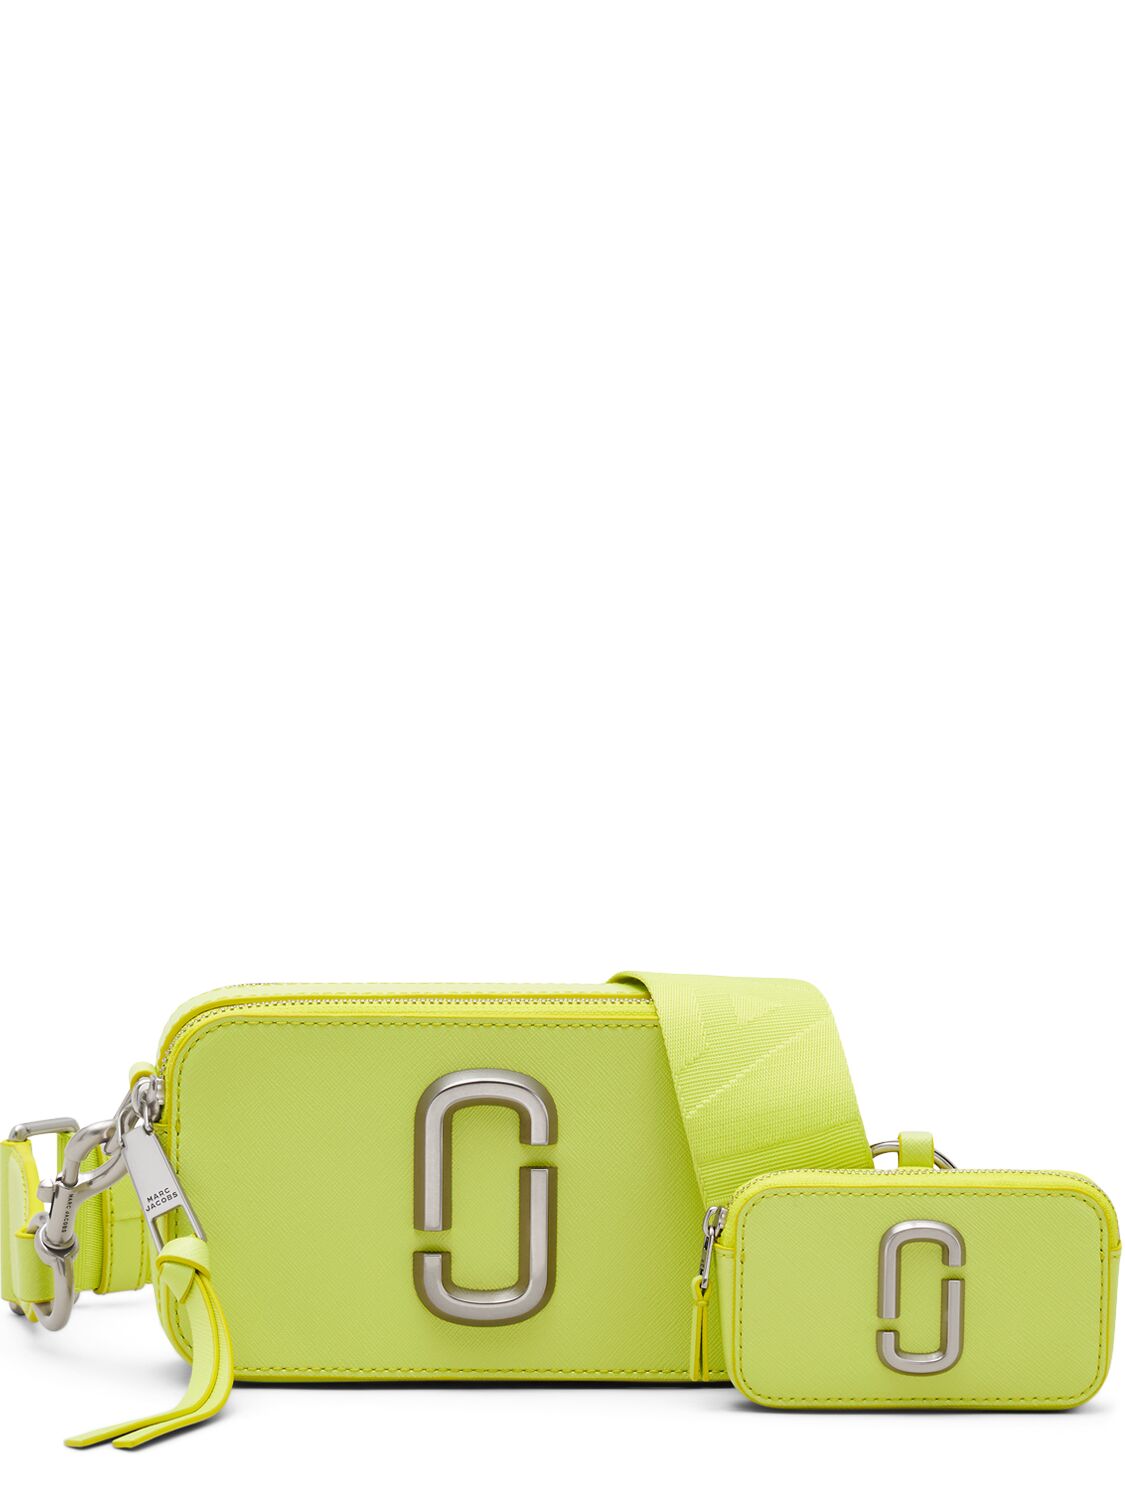 Marc Jacobs The Snapshot Leather Shoulder Bag In Limoncello